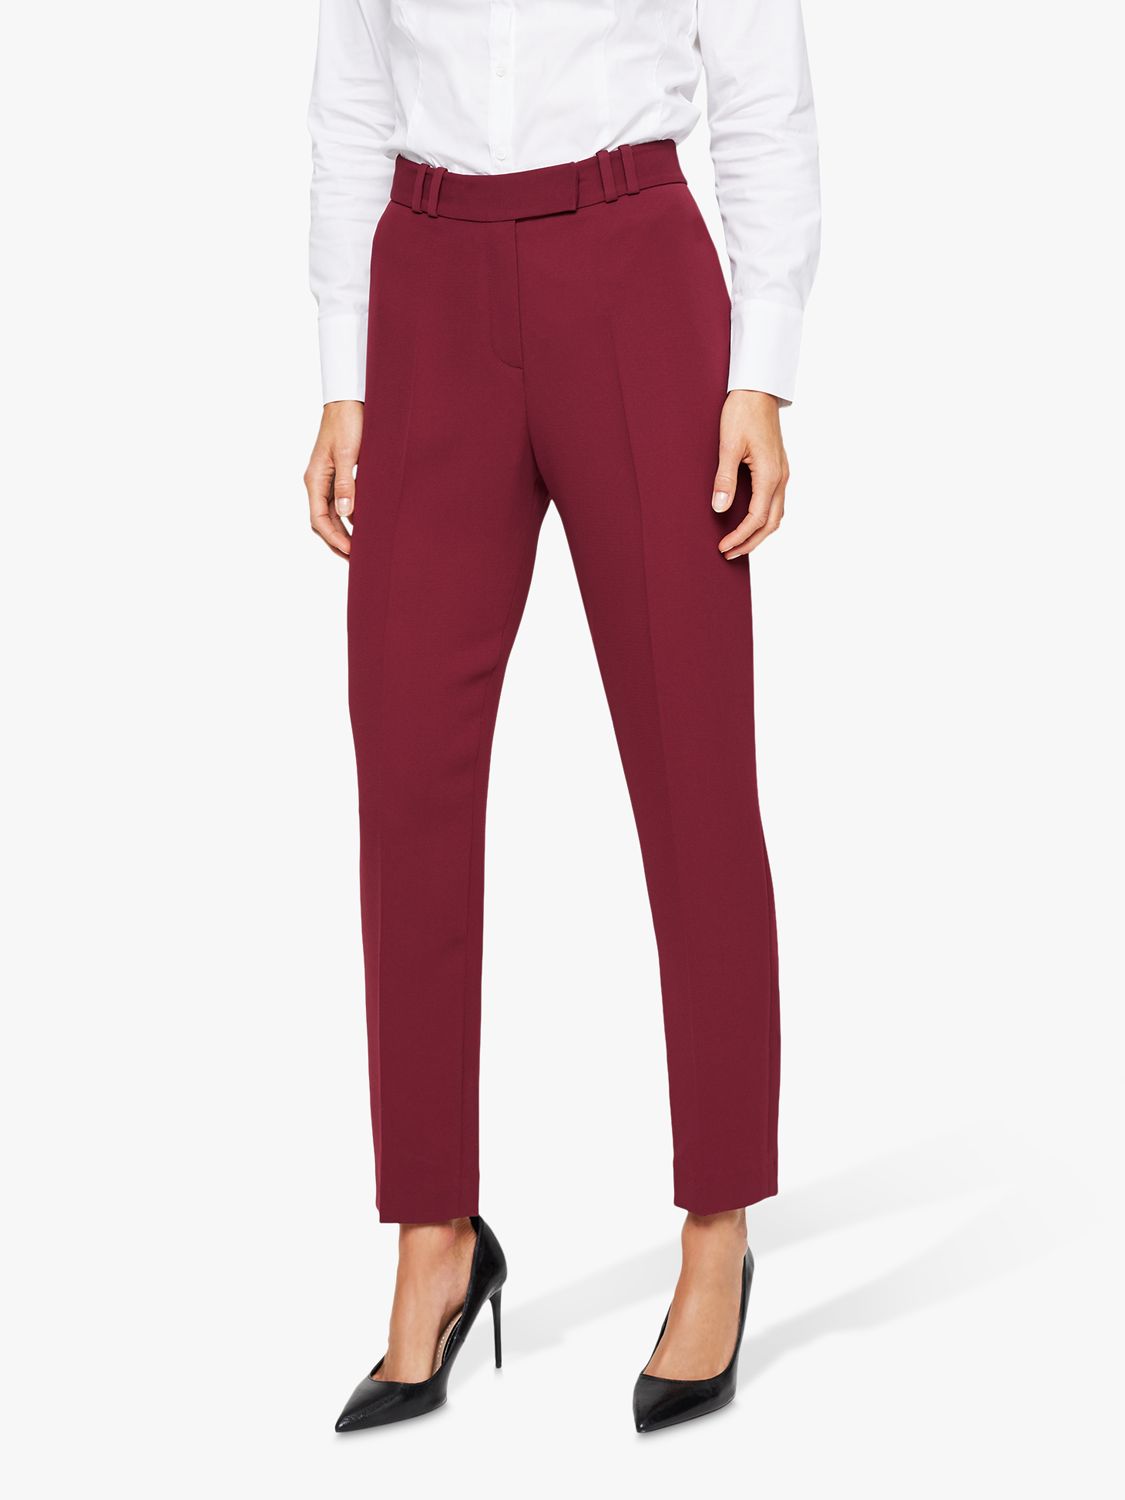 tapered suit trousers womens